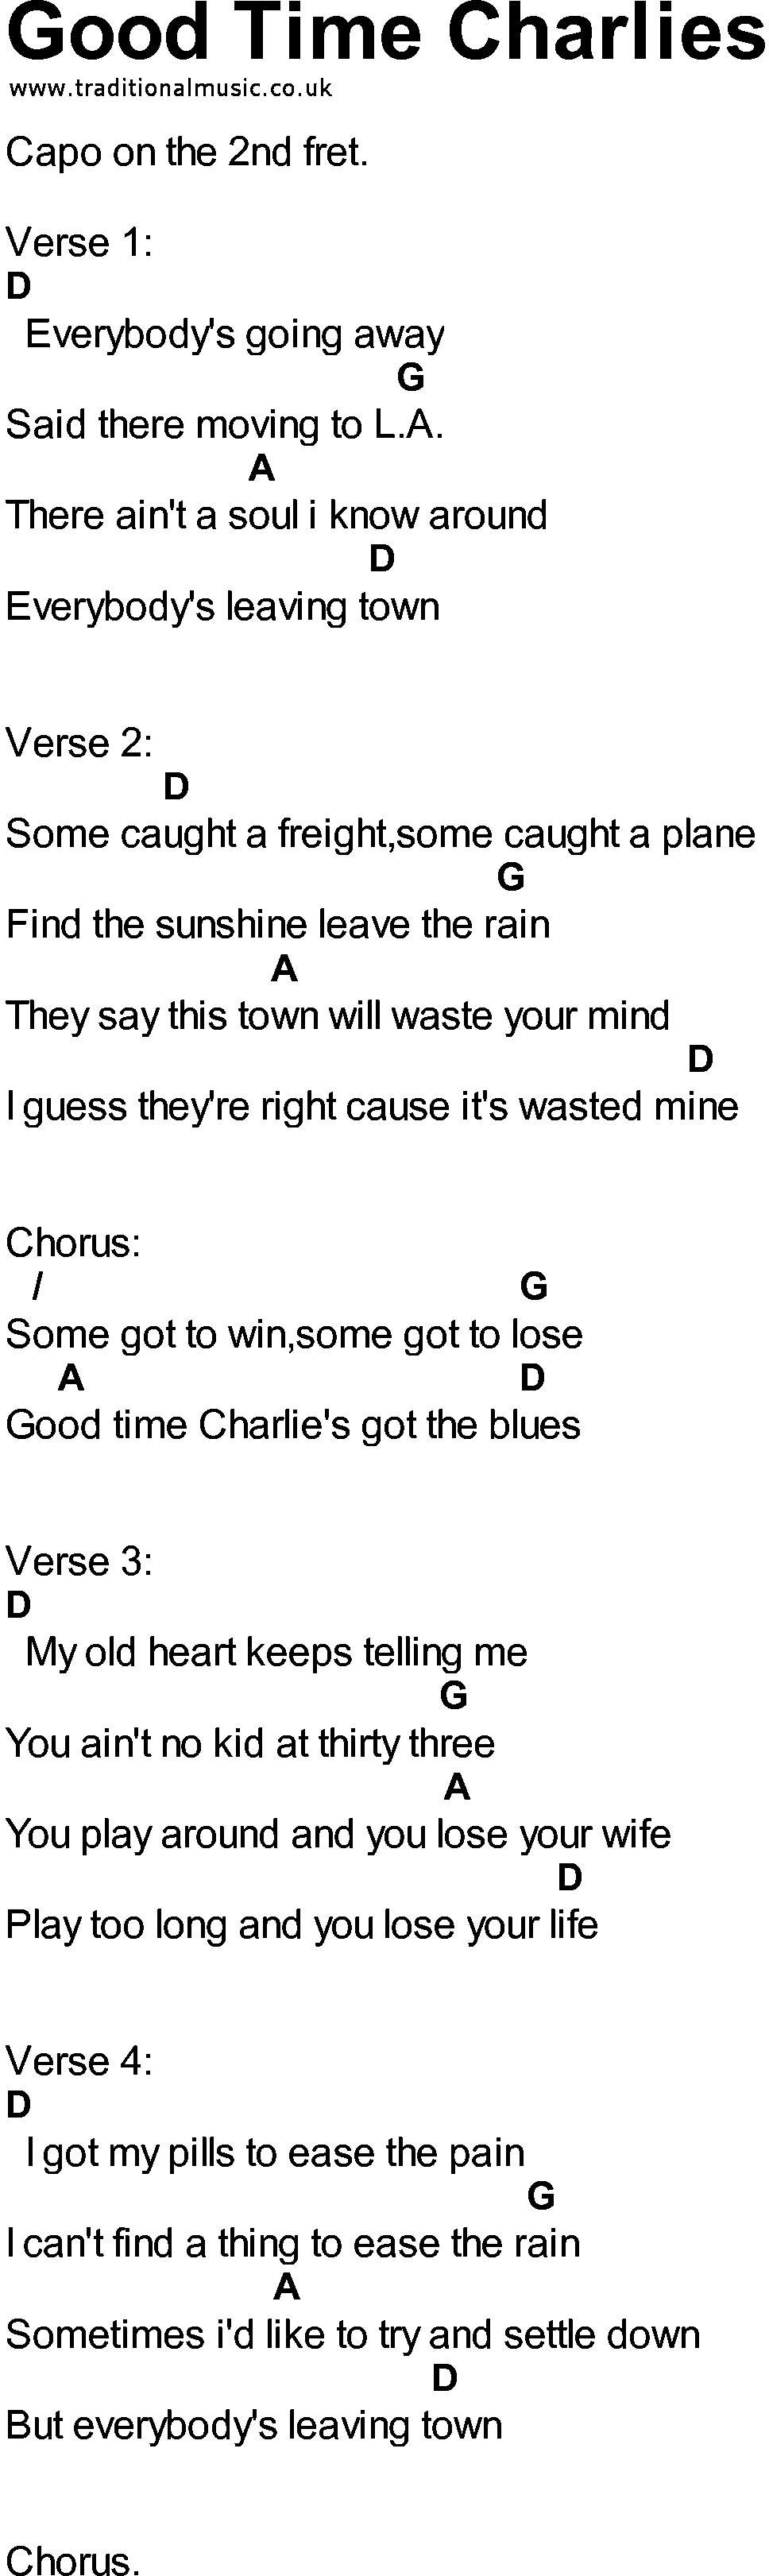 Bluegrass songs with chords - Good Time Charlies